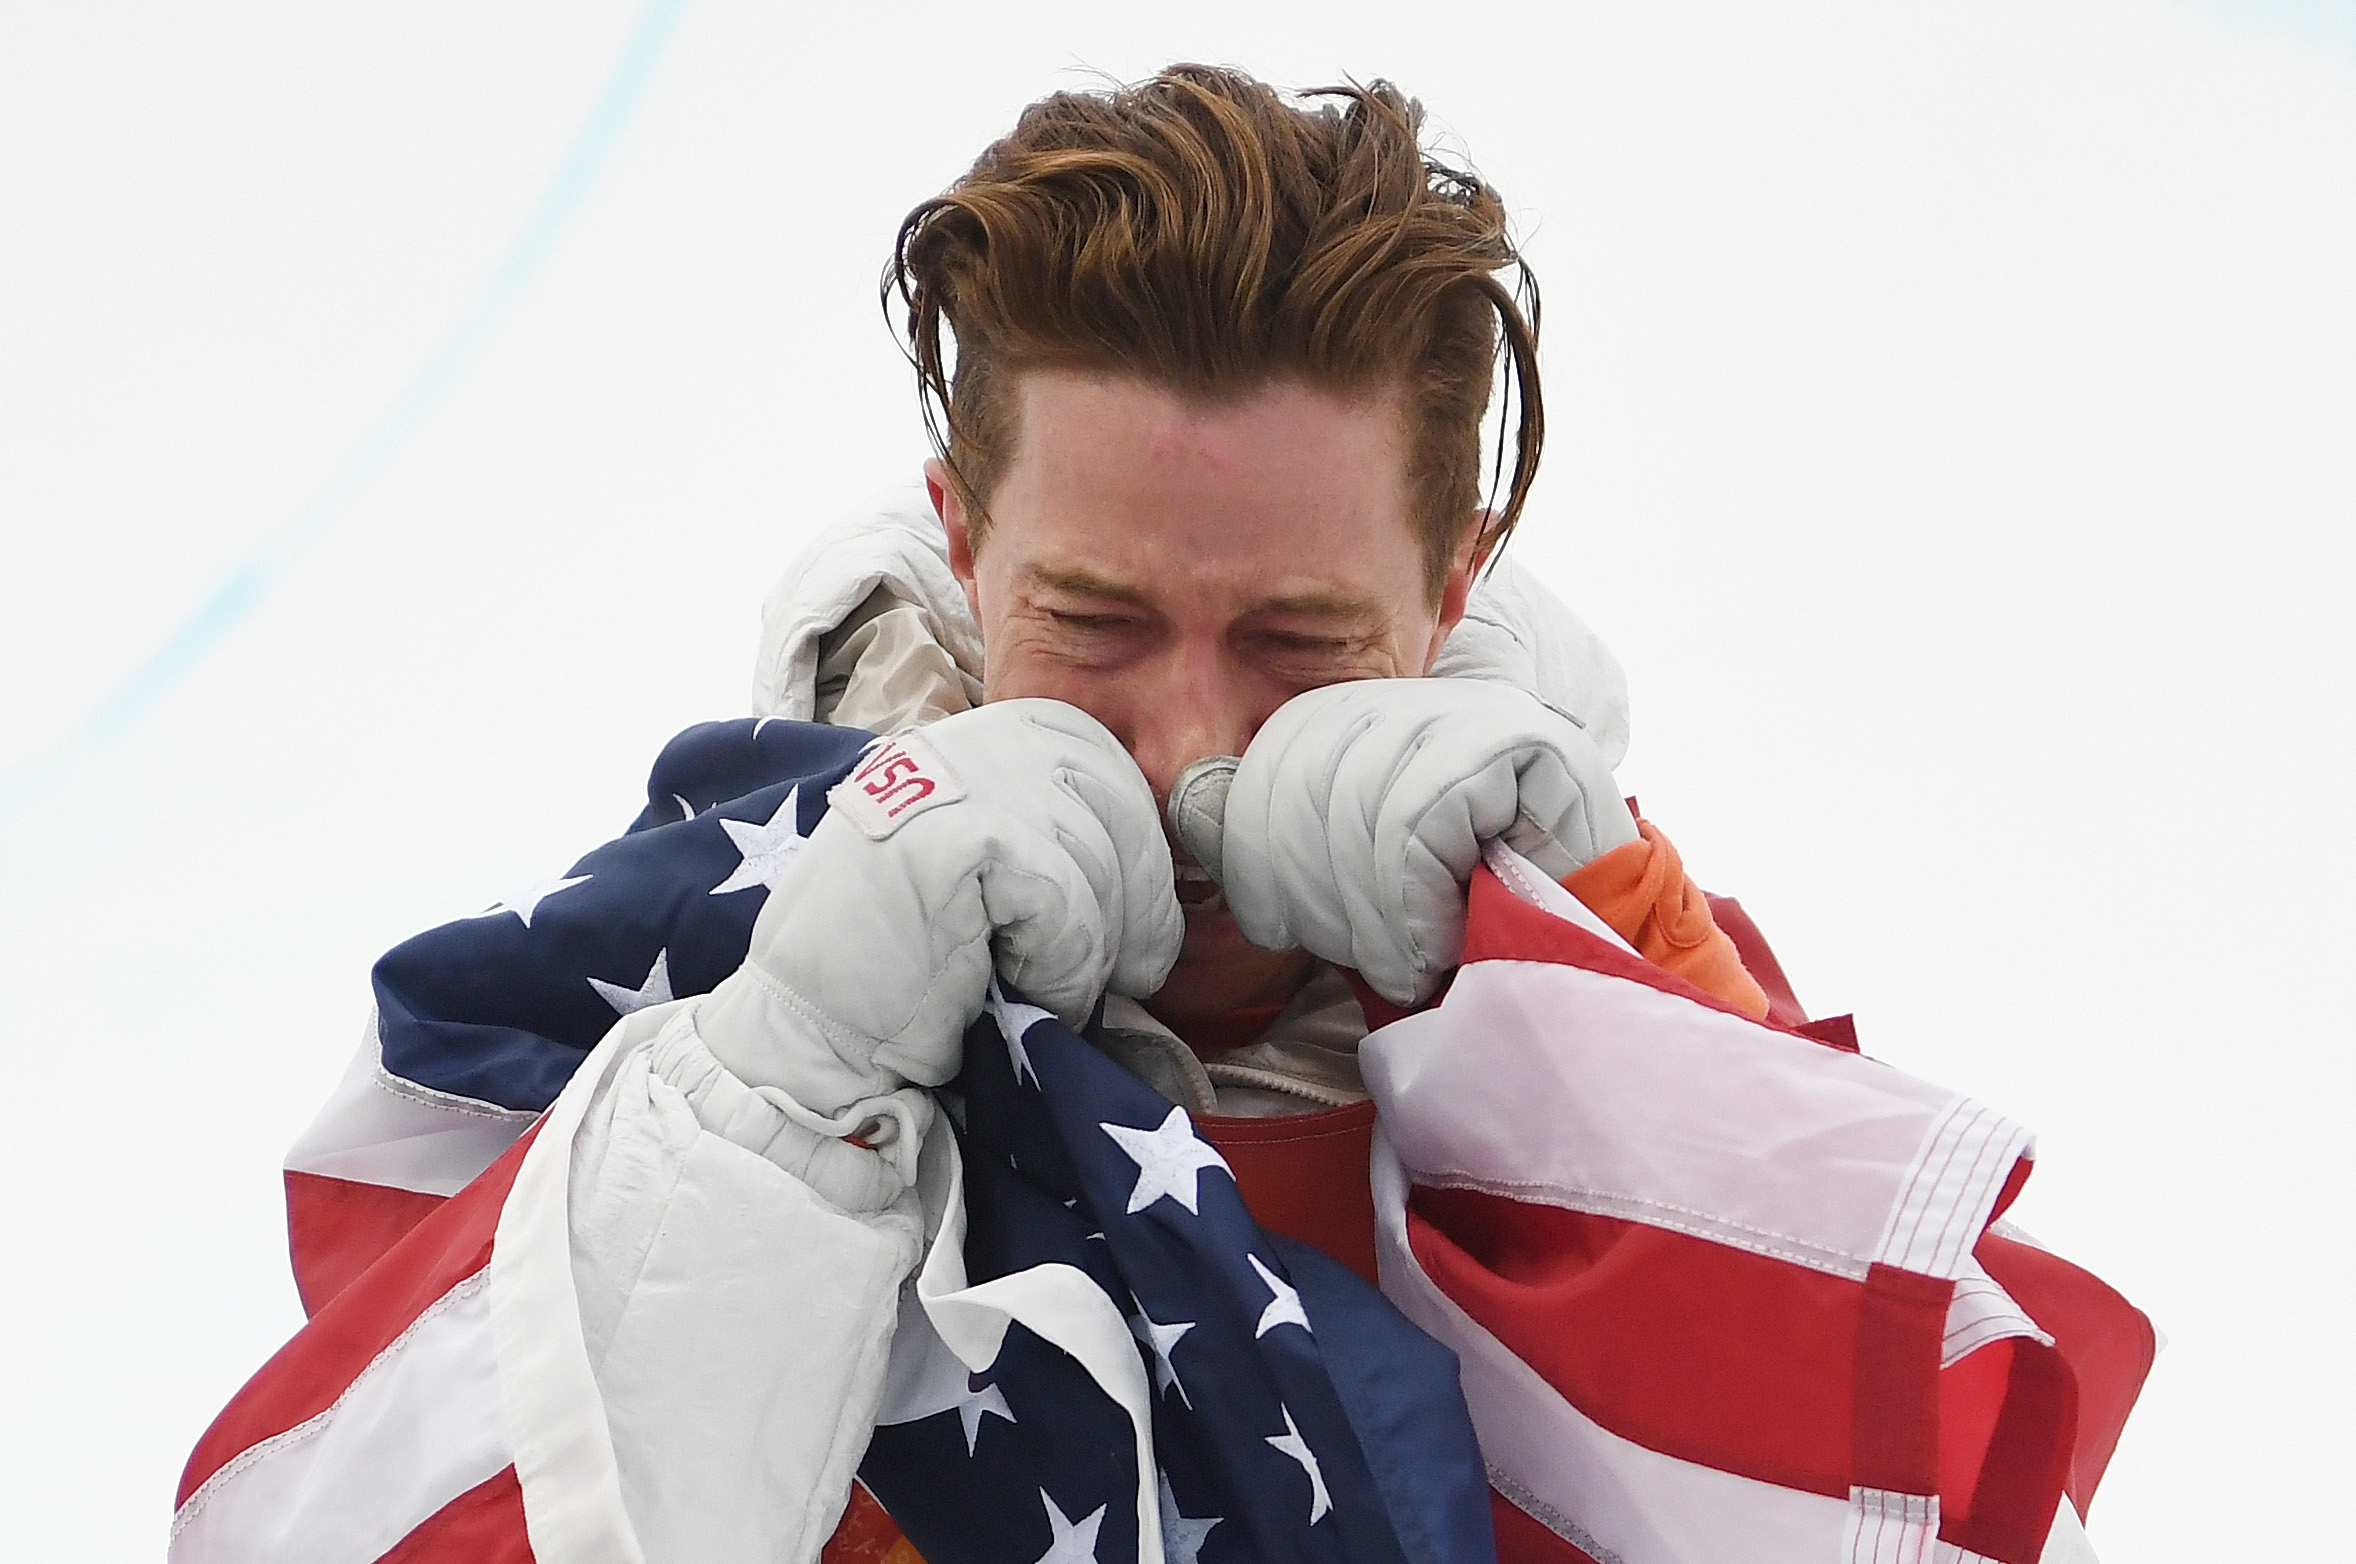 Gold medalist Shaun White of the United States poses during the victory ceremony for the Snowboard Men's Halfpipe Final on day five of the Winter Olympics in Pyeongchang-gun, South Korea, on Feb. 14, 2018. (David Ramos—Getty ImagesGold medalist Shaun White of the United States poses during the victory ceremony for the Snowboard Men's Halfpipe Final on day five of the Winter Olympics in Pyeongchang-gun, South Korea, on Feb. 14, 2018.)